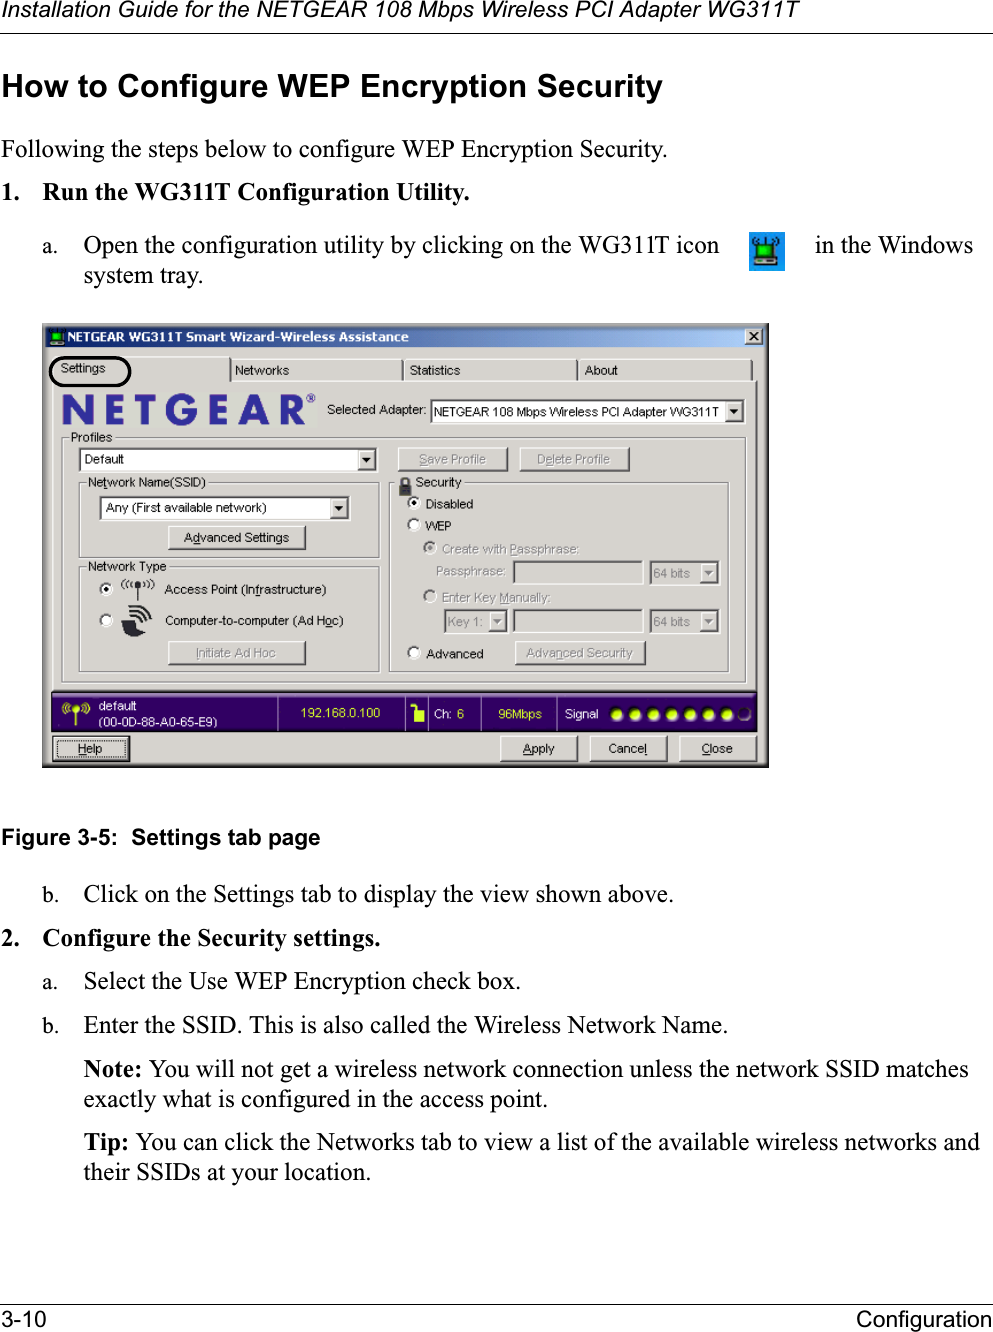 Installation Guide for the NETGEAR 108 Mbps Wireless PCI Adapter WG311T3-10 ConfigurationHow to Configure WEP Encryption SecurityFollowing the steps below to configure WEP Encryption Security.1. Run the WG311T Configuration Utility.a. Open the configuration utility by clicking on the WG311T icon   in the Windows system tray. Figure 3-5:  Settings tab pageb. Click on the Settings tab to display the view shown above. 2. Configure the Security settings. a. Select the Use WEP Encryption check box.b. Enter the SSID. This is also called the Wireless Network Name.Note: You will not get a wireless network connection unless the network SSID matches exactly what is configured in the access point. Tip: You can click the Networks tab to view a list of the available wireless networks and their SSIDs at your location. 